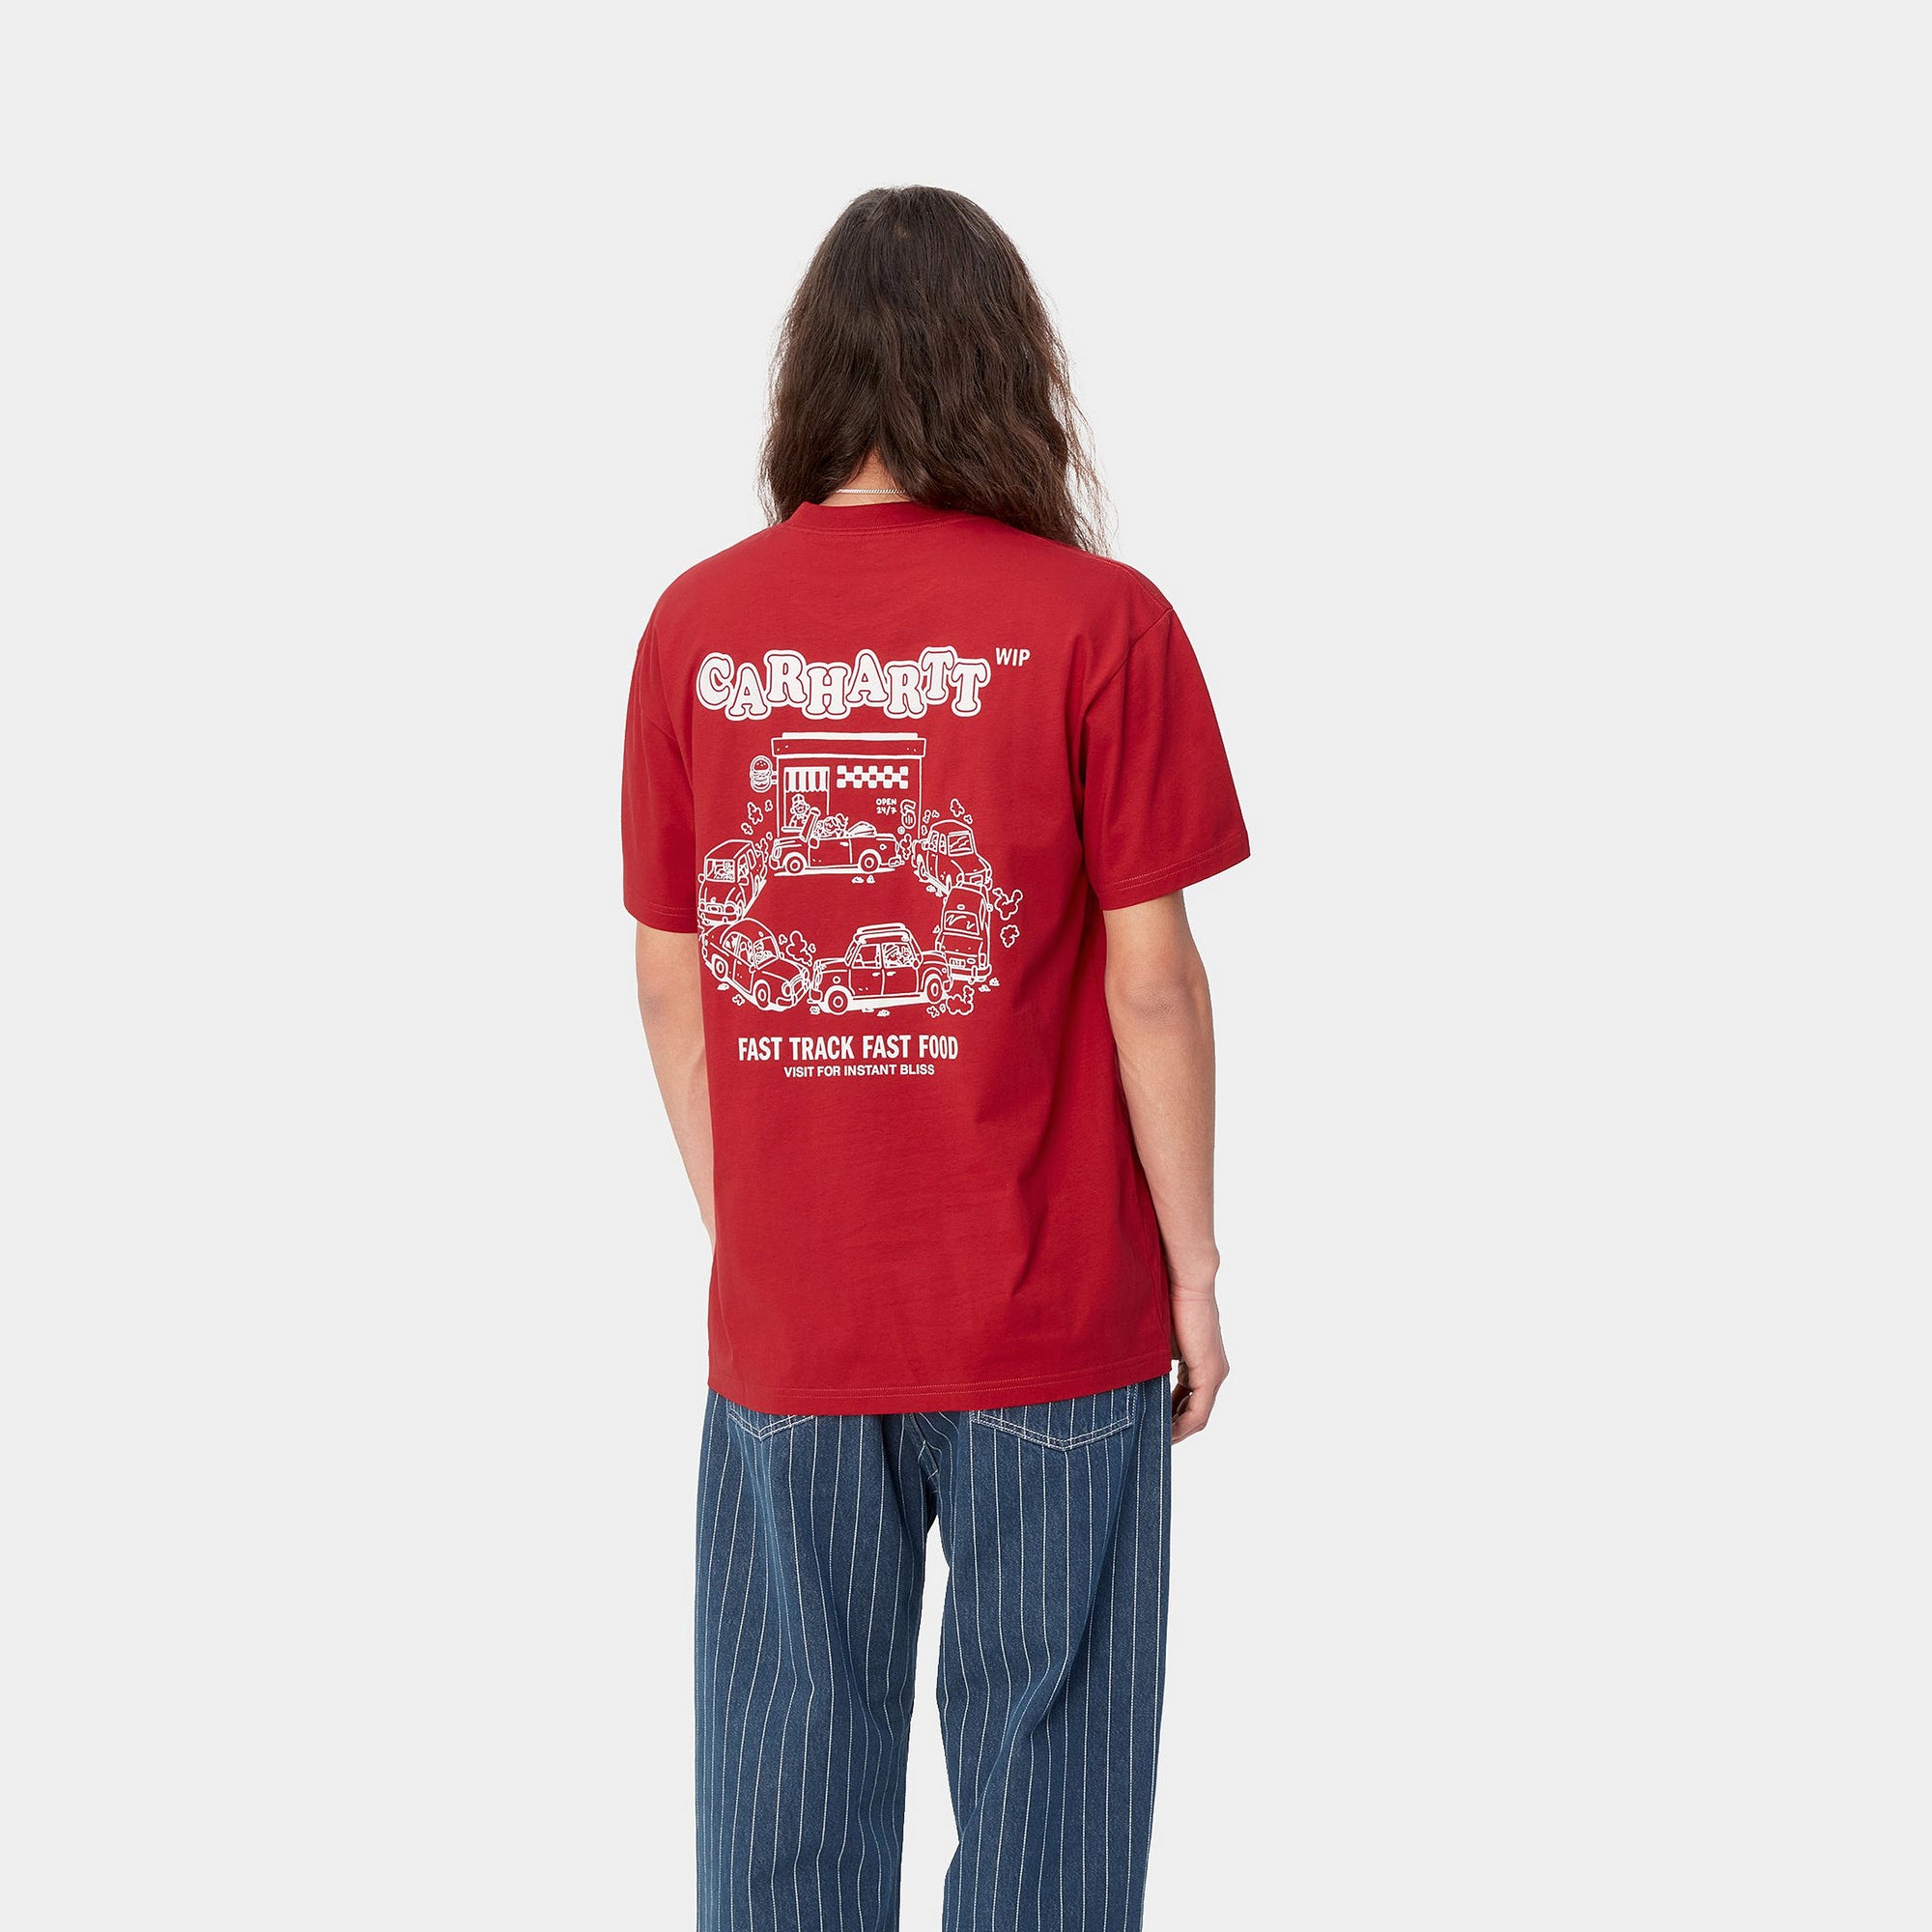 Carhartt WIP S/S Fast Food T-Shirt (red/white) - Blue Mountain Store